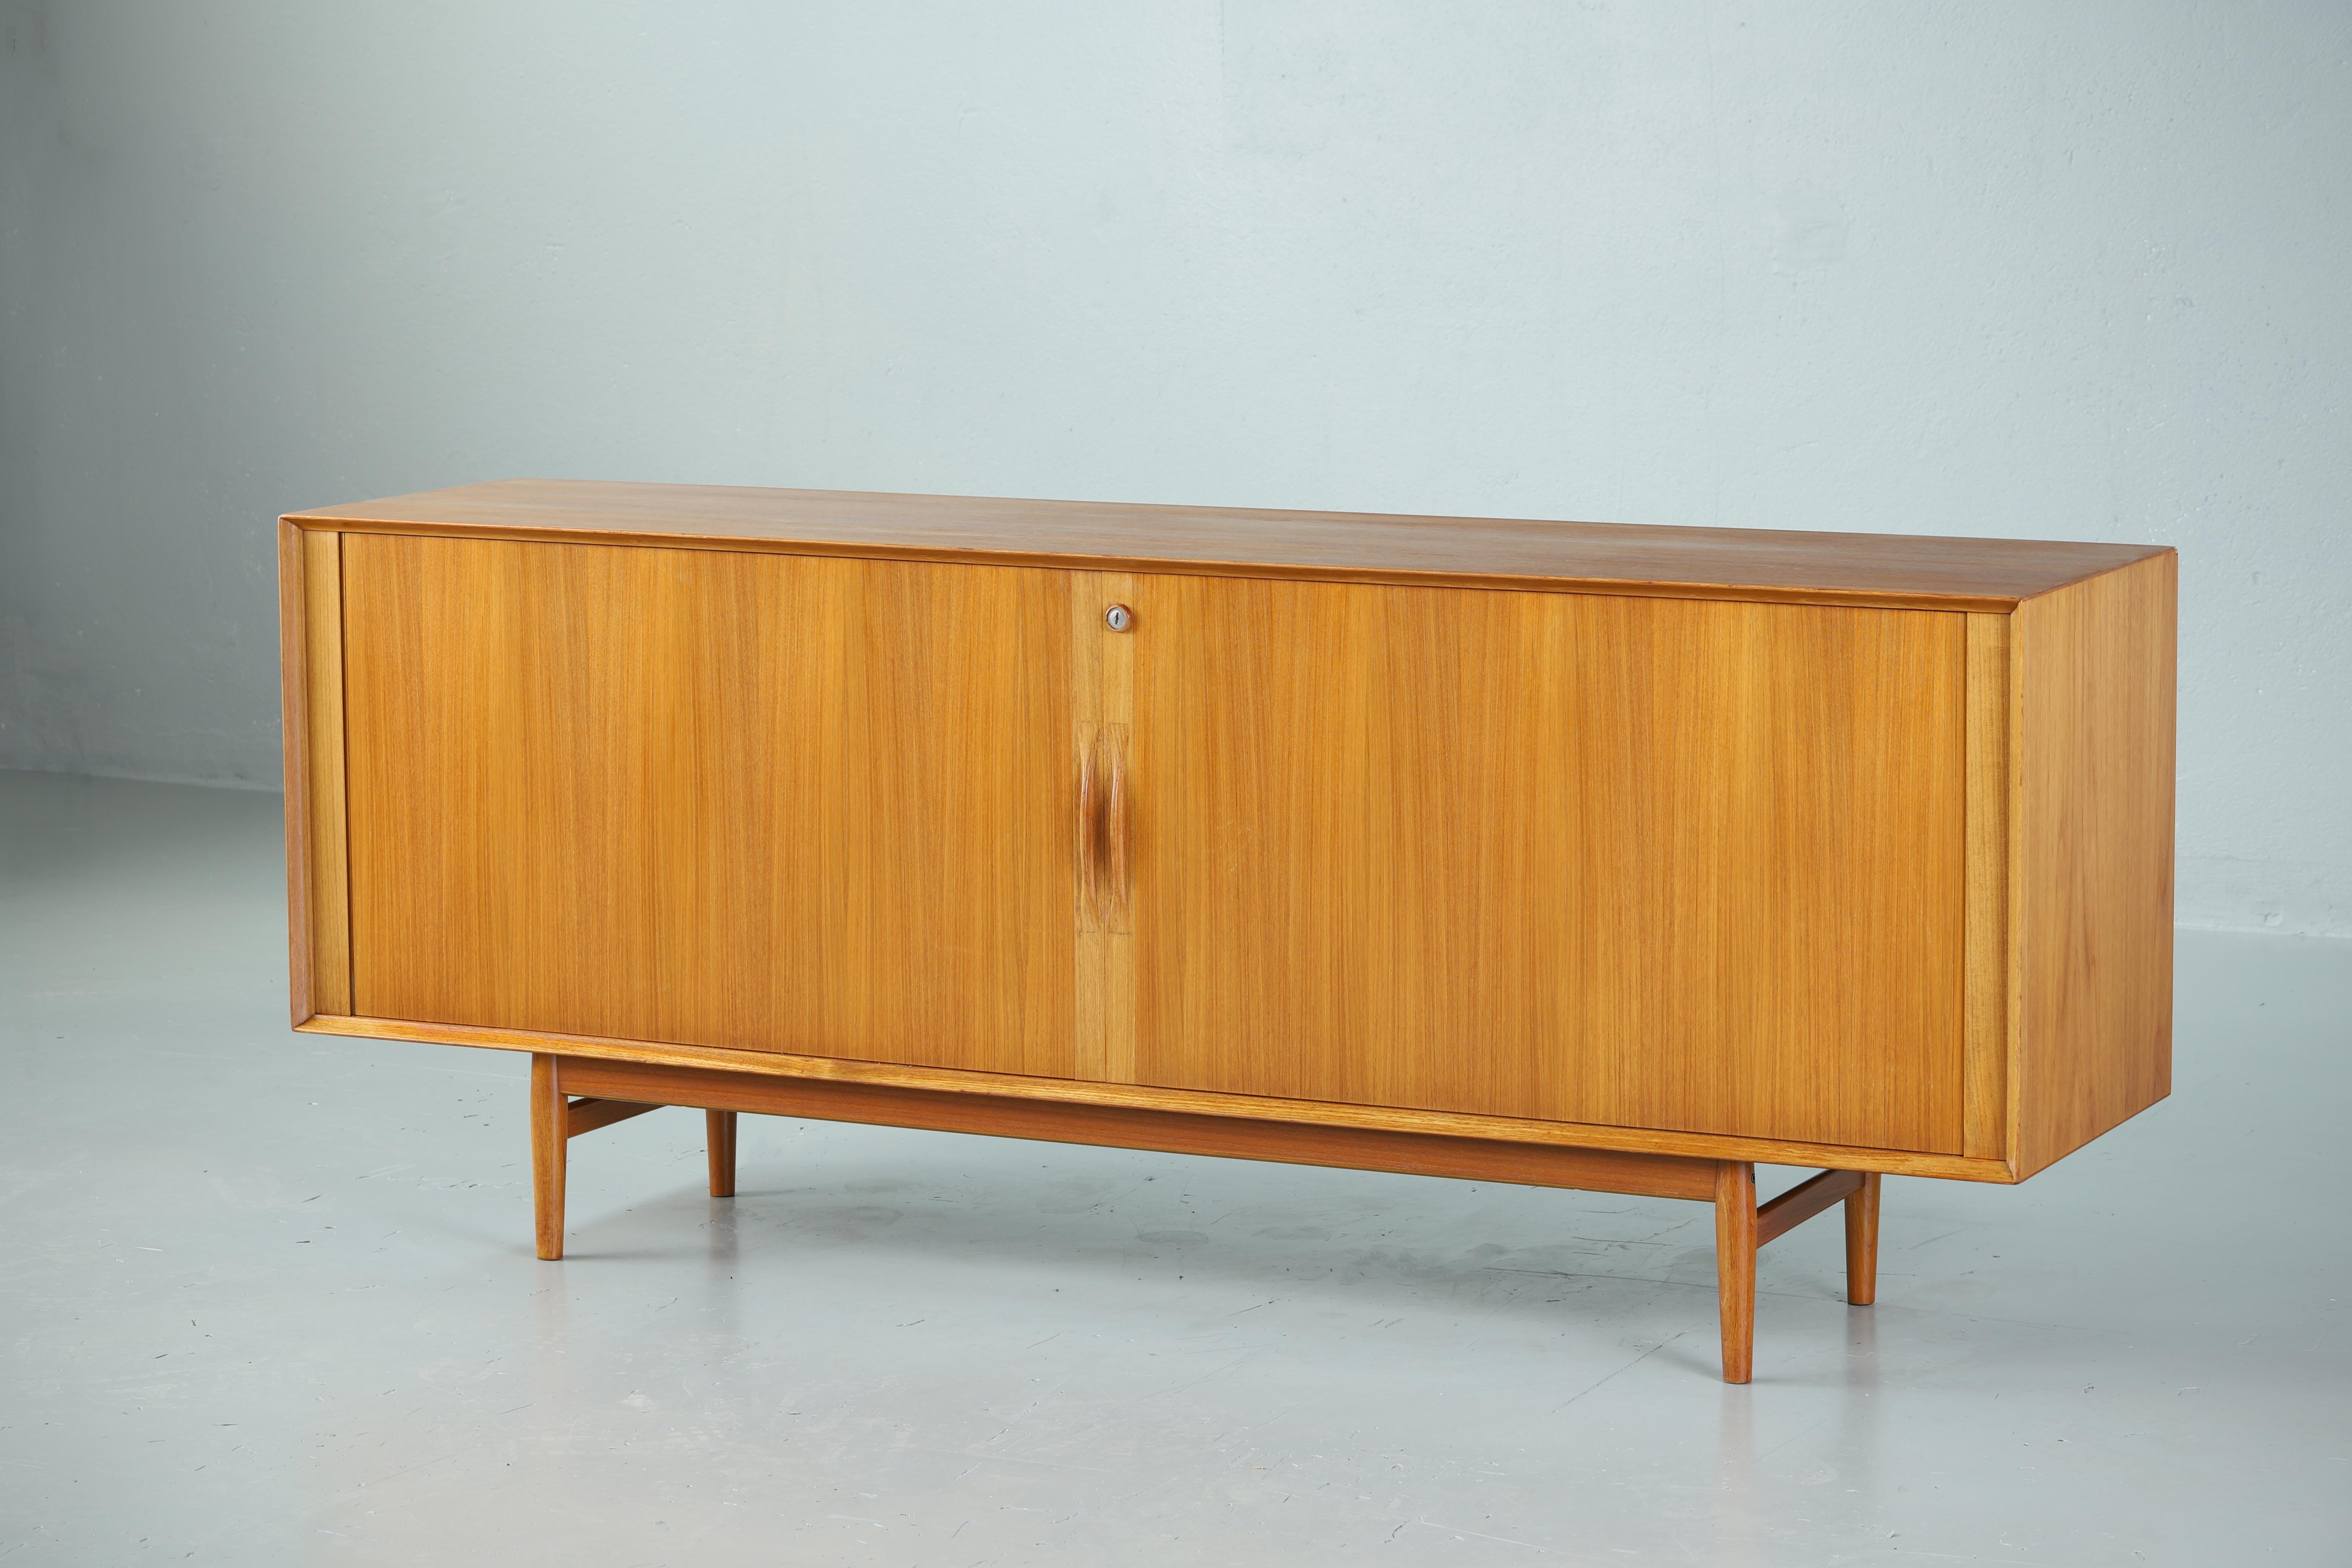 OS 37 sideboard ('Triennale' sideboard) designed by Arne Vodder (Denmark, 1926-2009) for Siblast, circa 1959.
This sideboard features perfect proportions and recognizable love of detail, high quality workmanship using first class materials.
Two